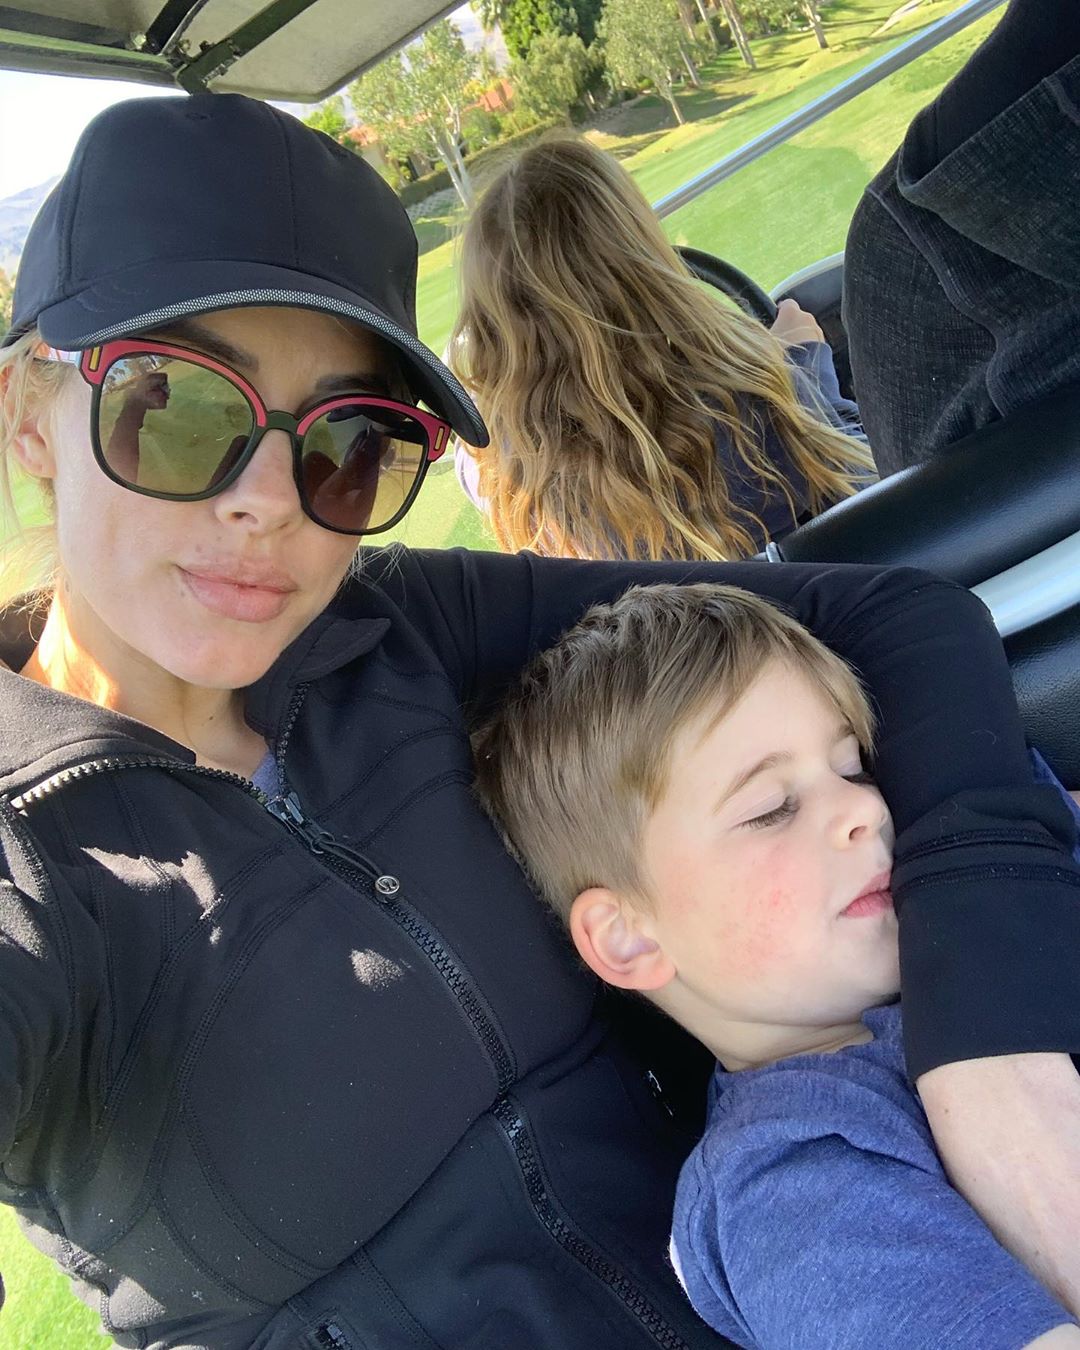 6 March 2020 Heather Rae Young’s Sweetest Moments With Tarek El Moussa’s Kids